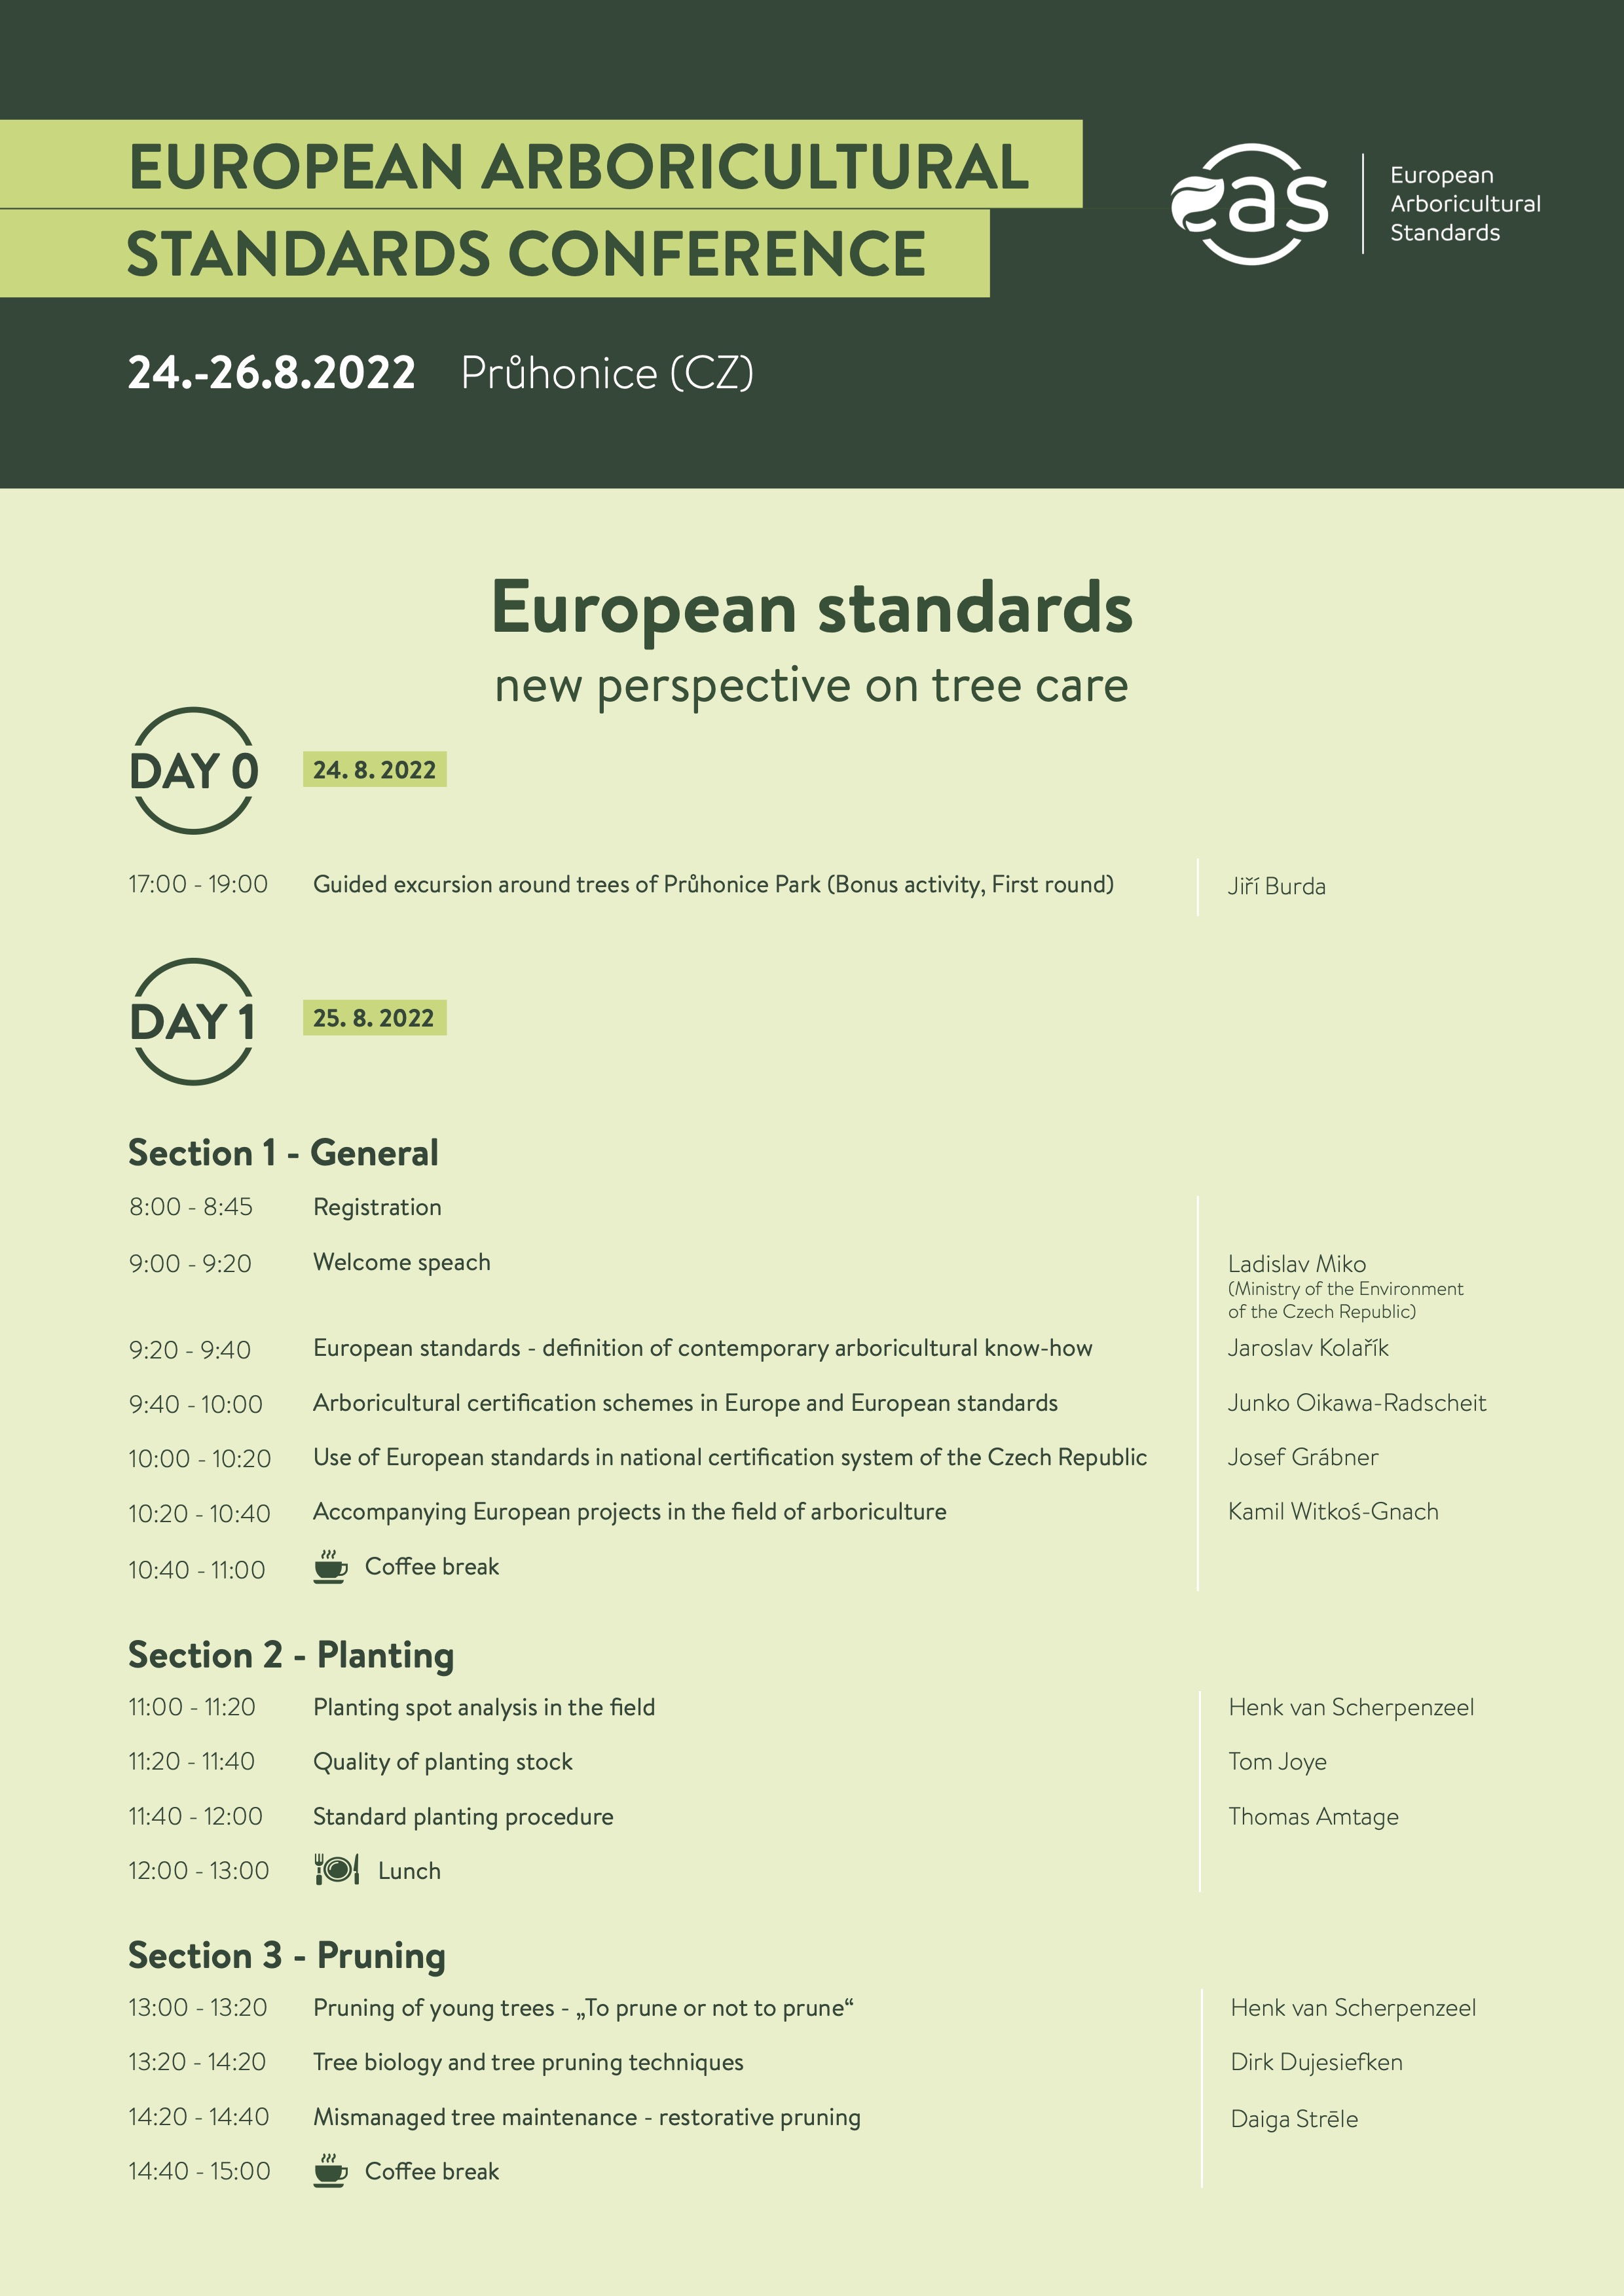 European Arborictultural Standards Conference - FINAL ENG - page 1jpg